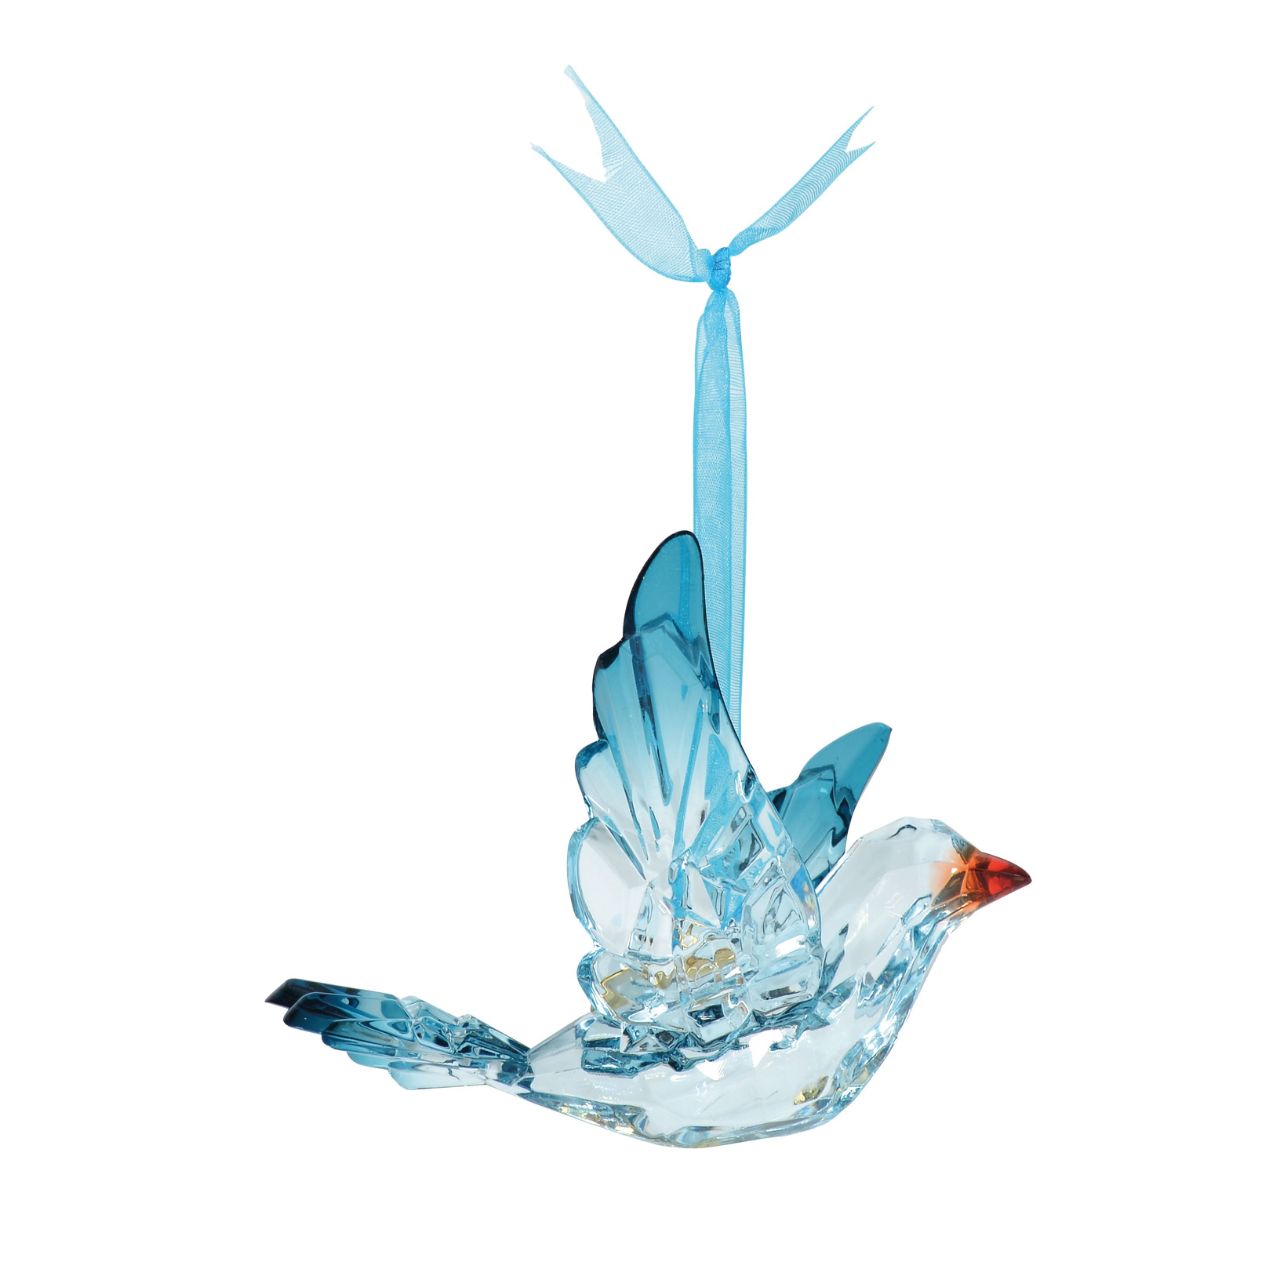 Messenger Bluebird Hanging Ornament  Gorgeous 'Happiness Lives Here' Bluebird. Made from stunning acrylic, each facet catching the light. With a sentiment card attached to each, these are the perfect gift to brighten anyones day. 'My blue colour is calming, my sweet chirp is bright.